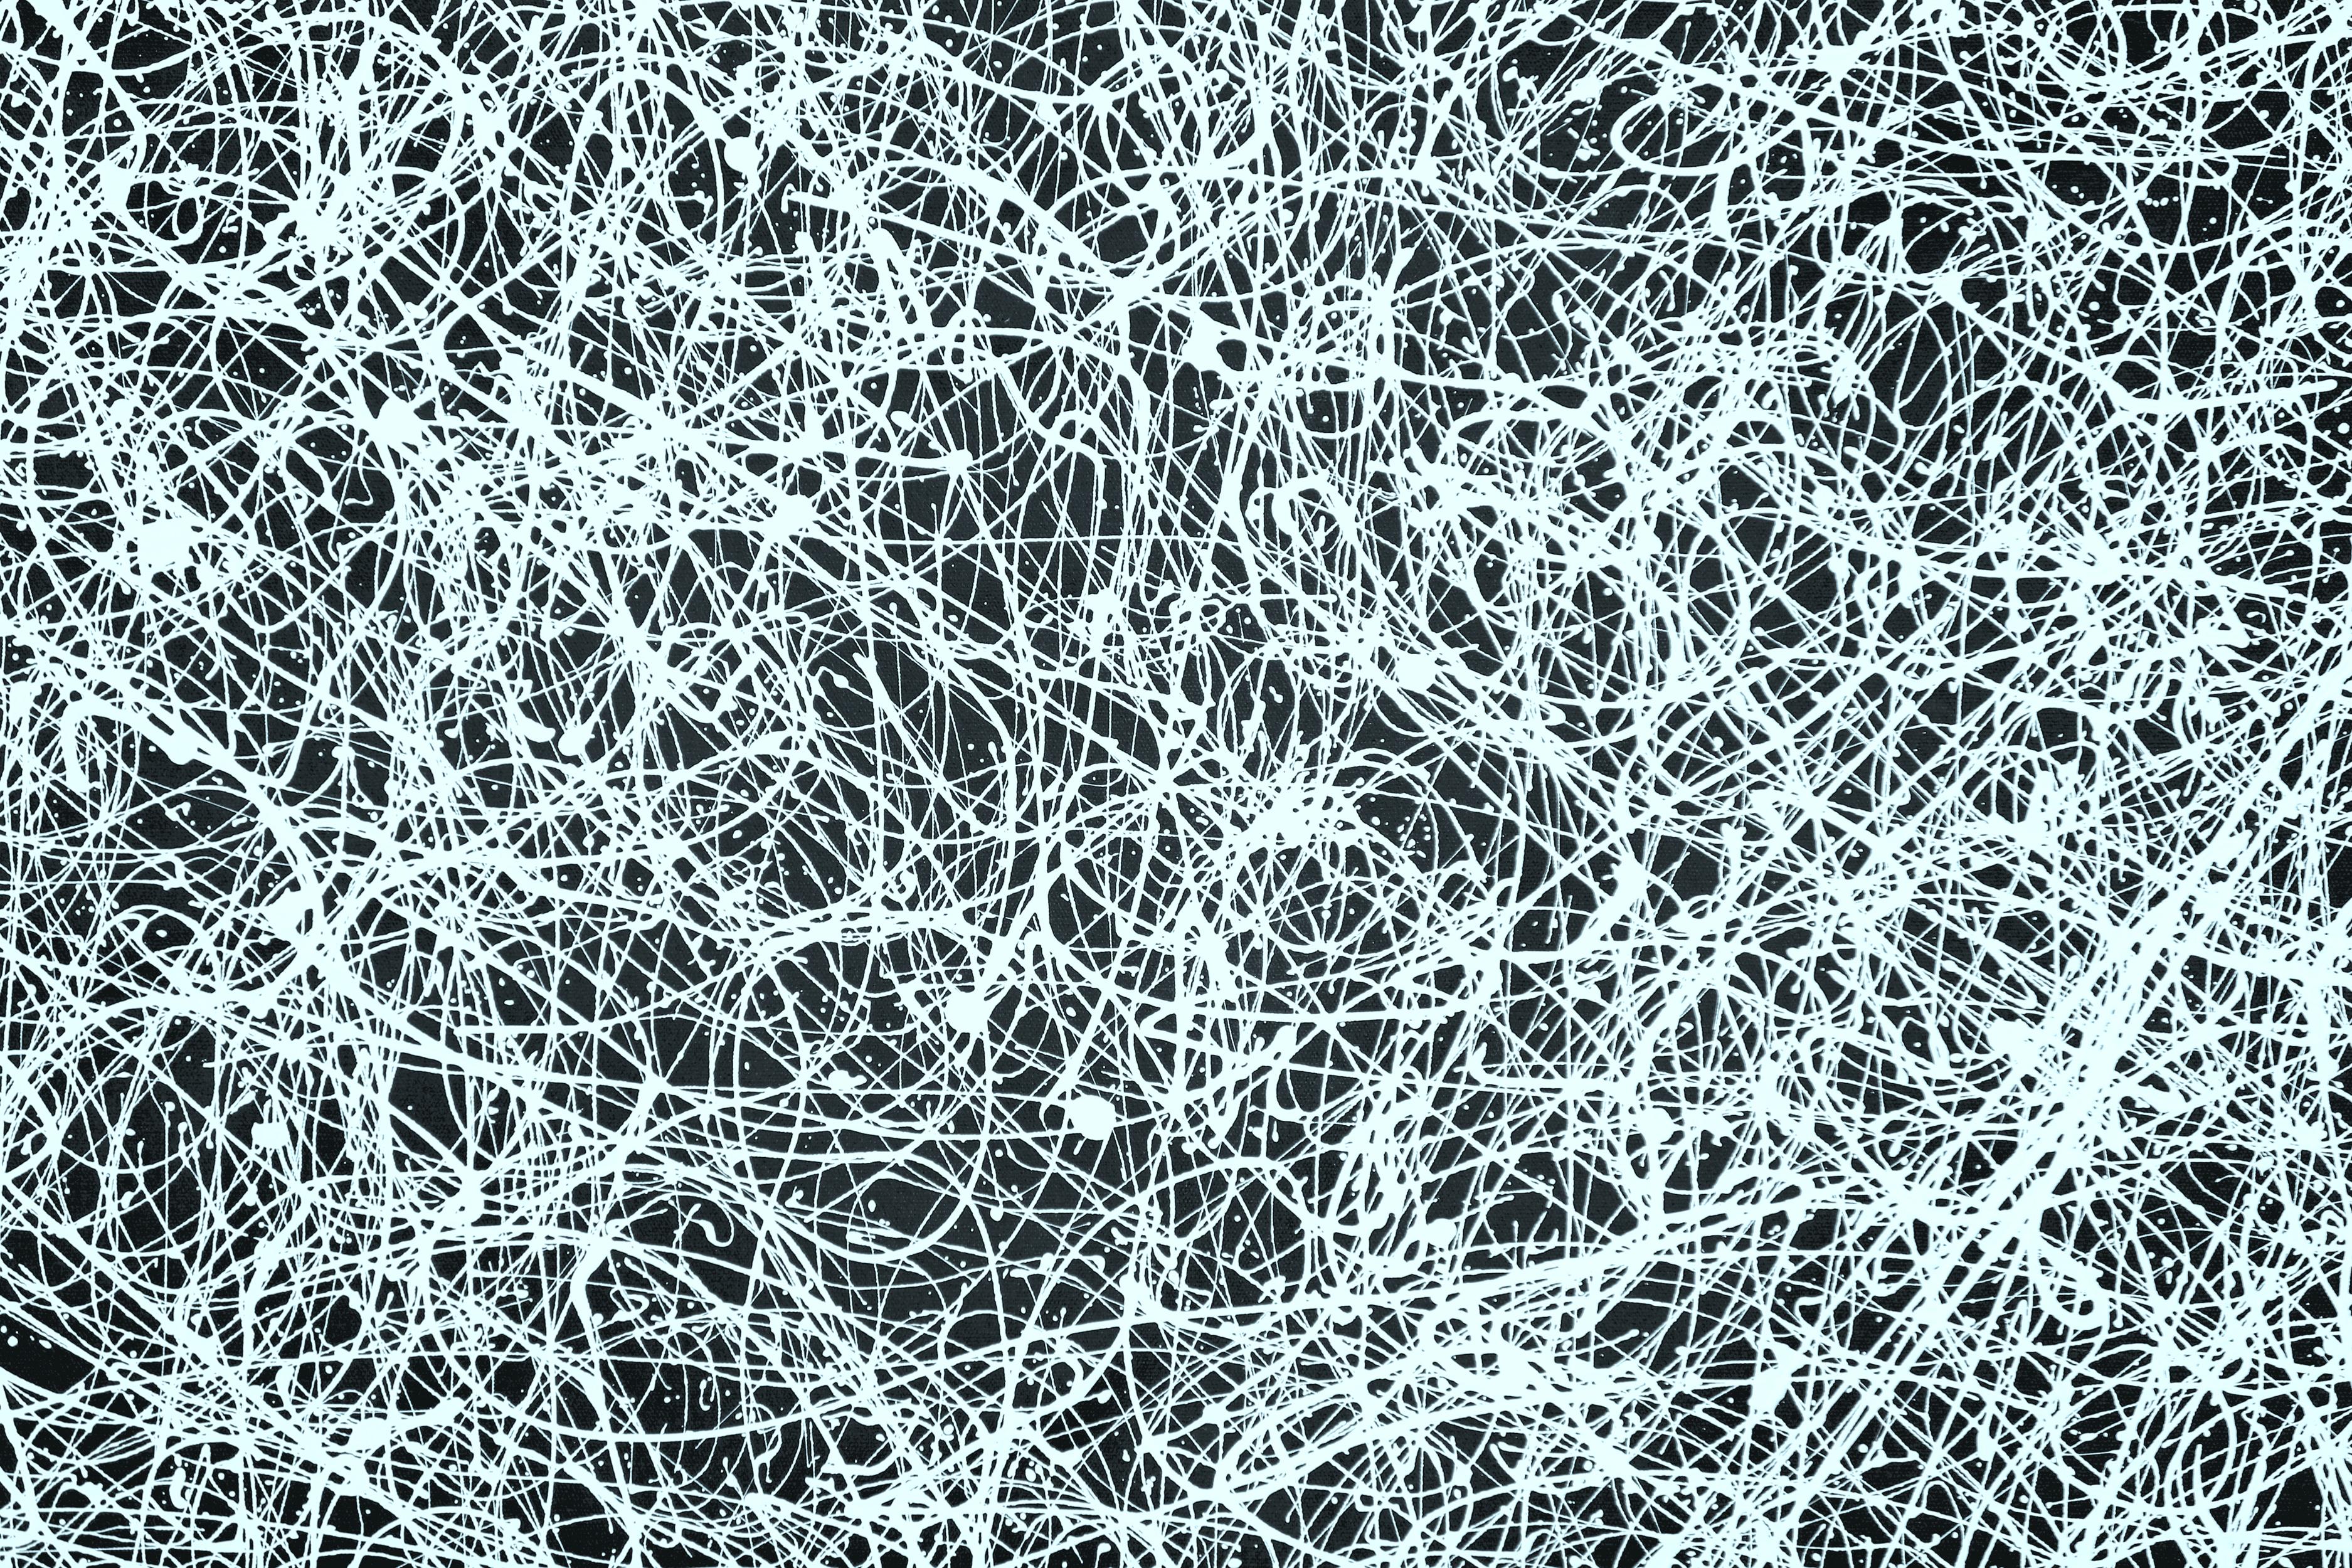 Cosmic Web - Gray Abstract Painting by Estelle Asmodelle